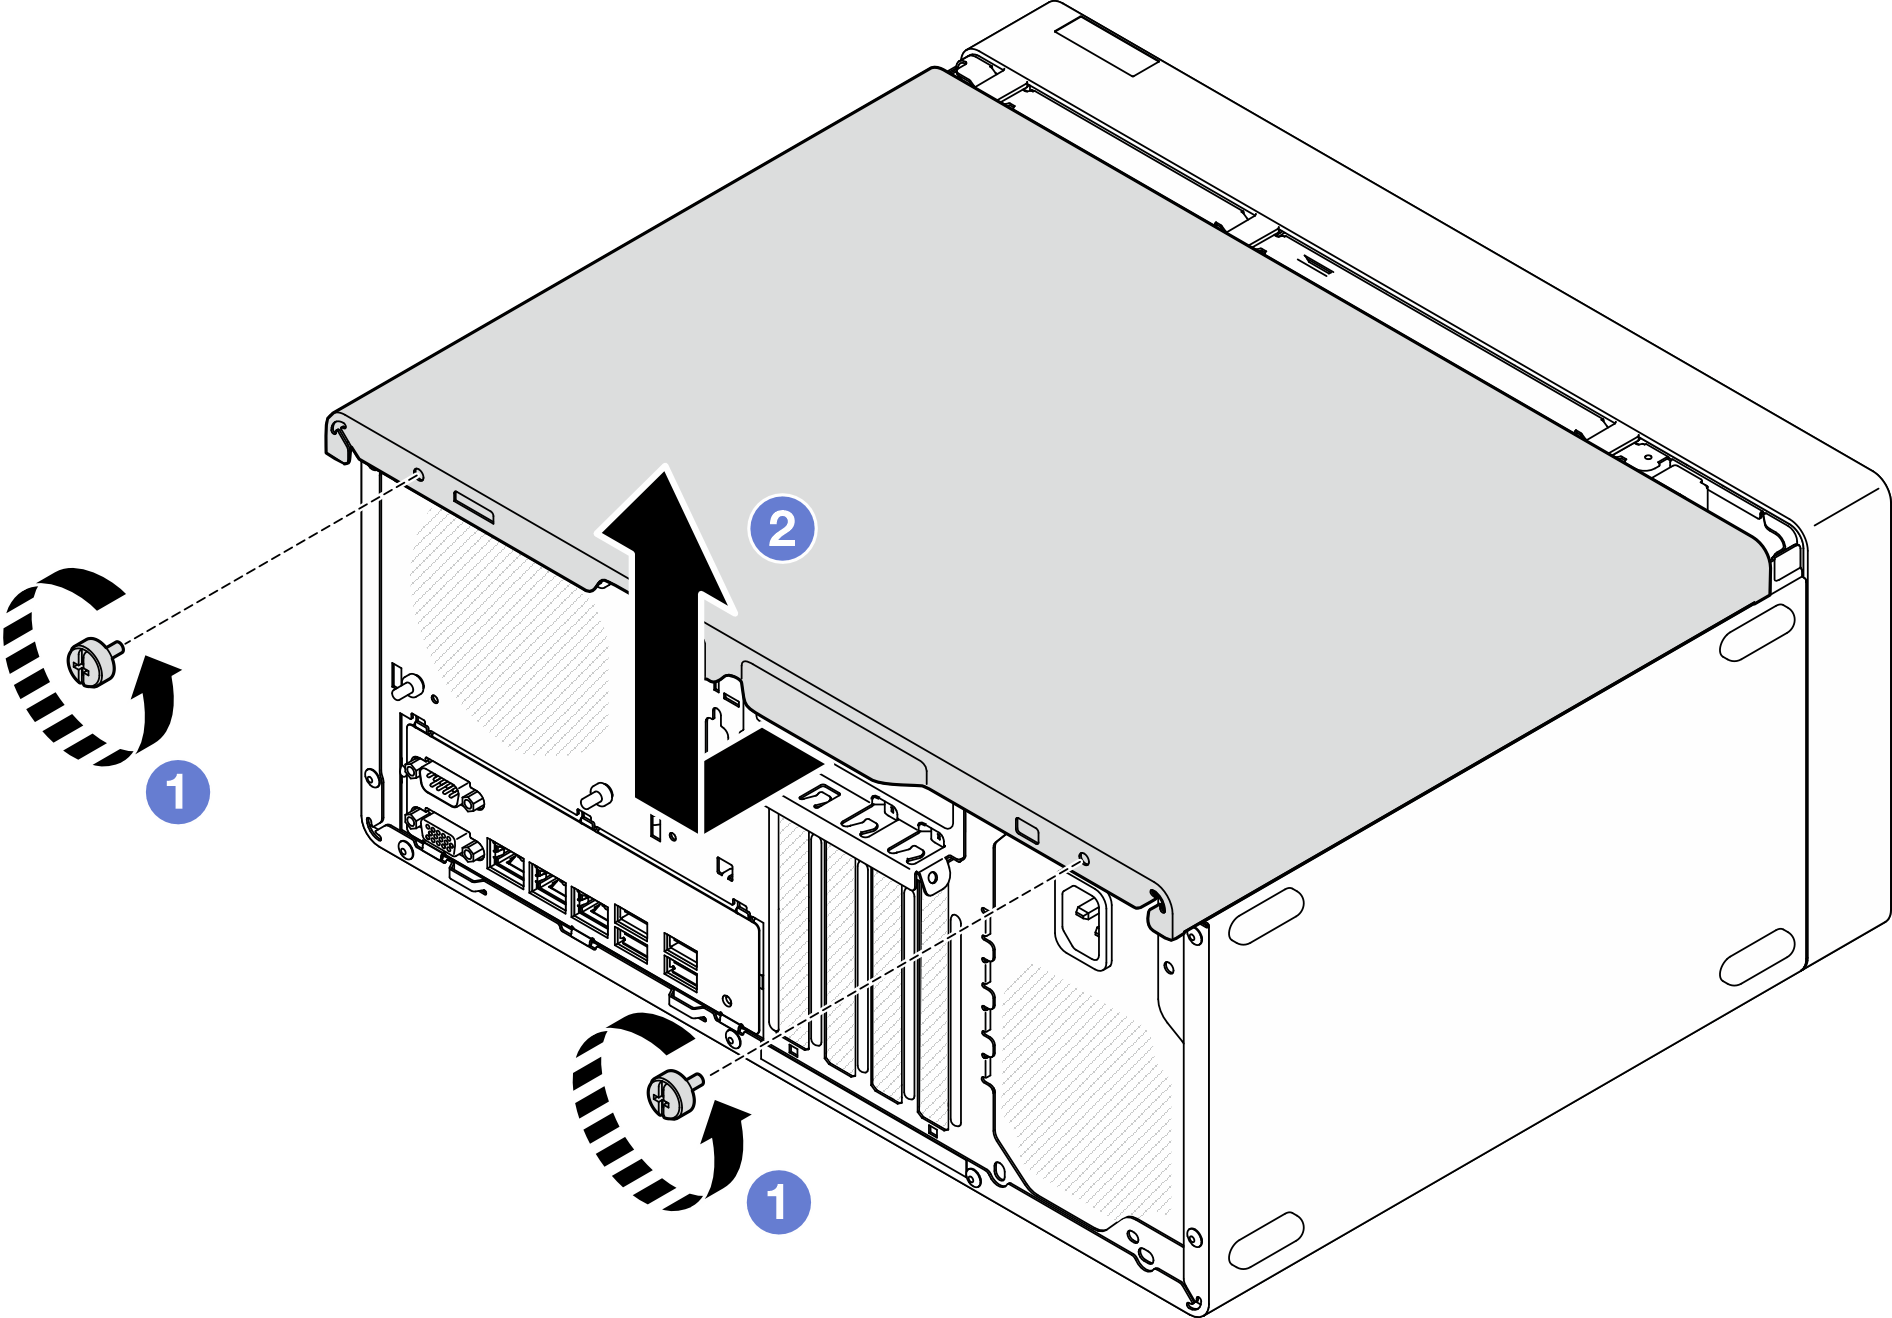 Server cover removal